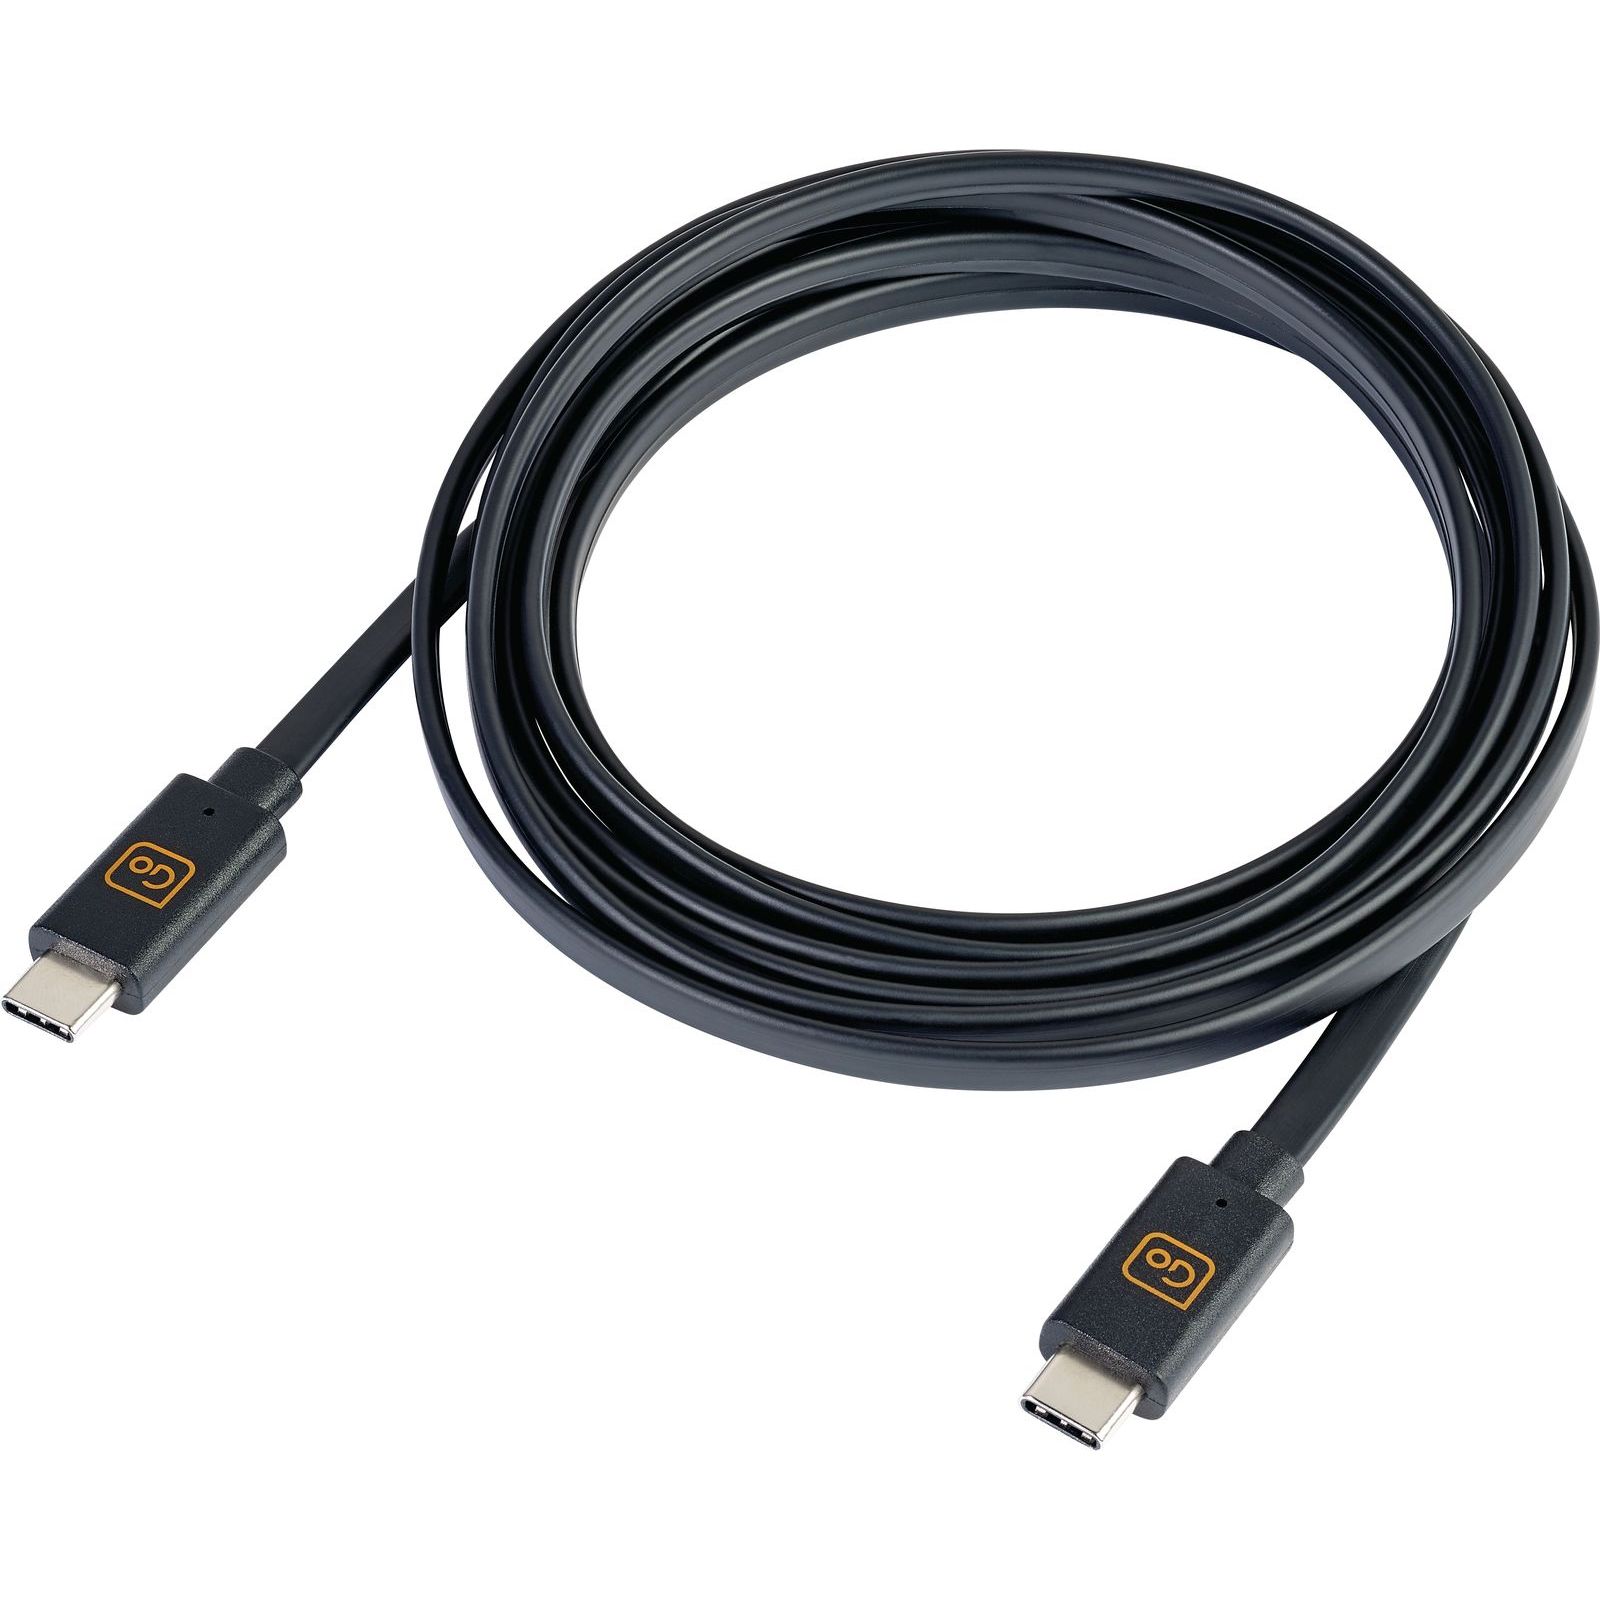 2M Dual Cable